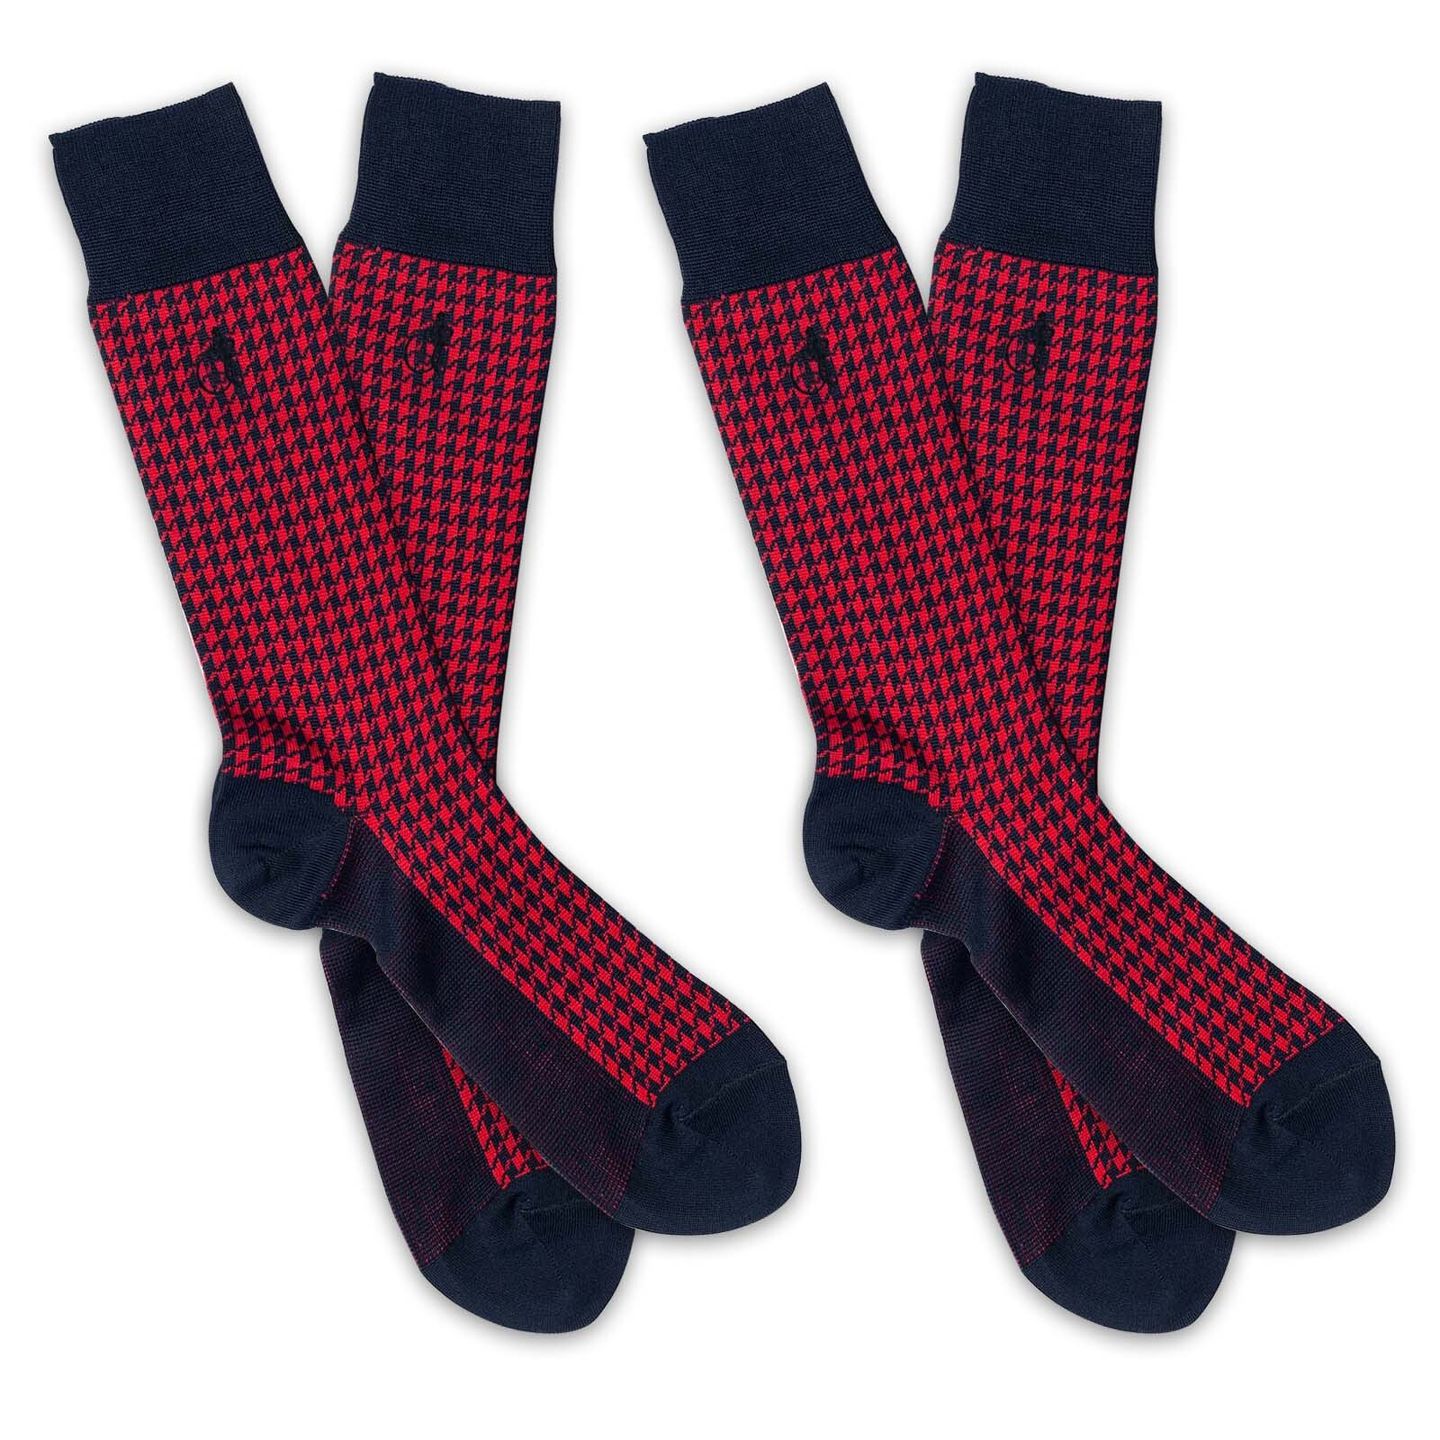 2 pairs of red and black chequered socks from the Houndstooth bundle